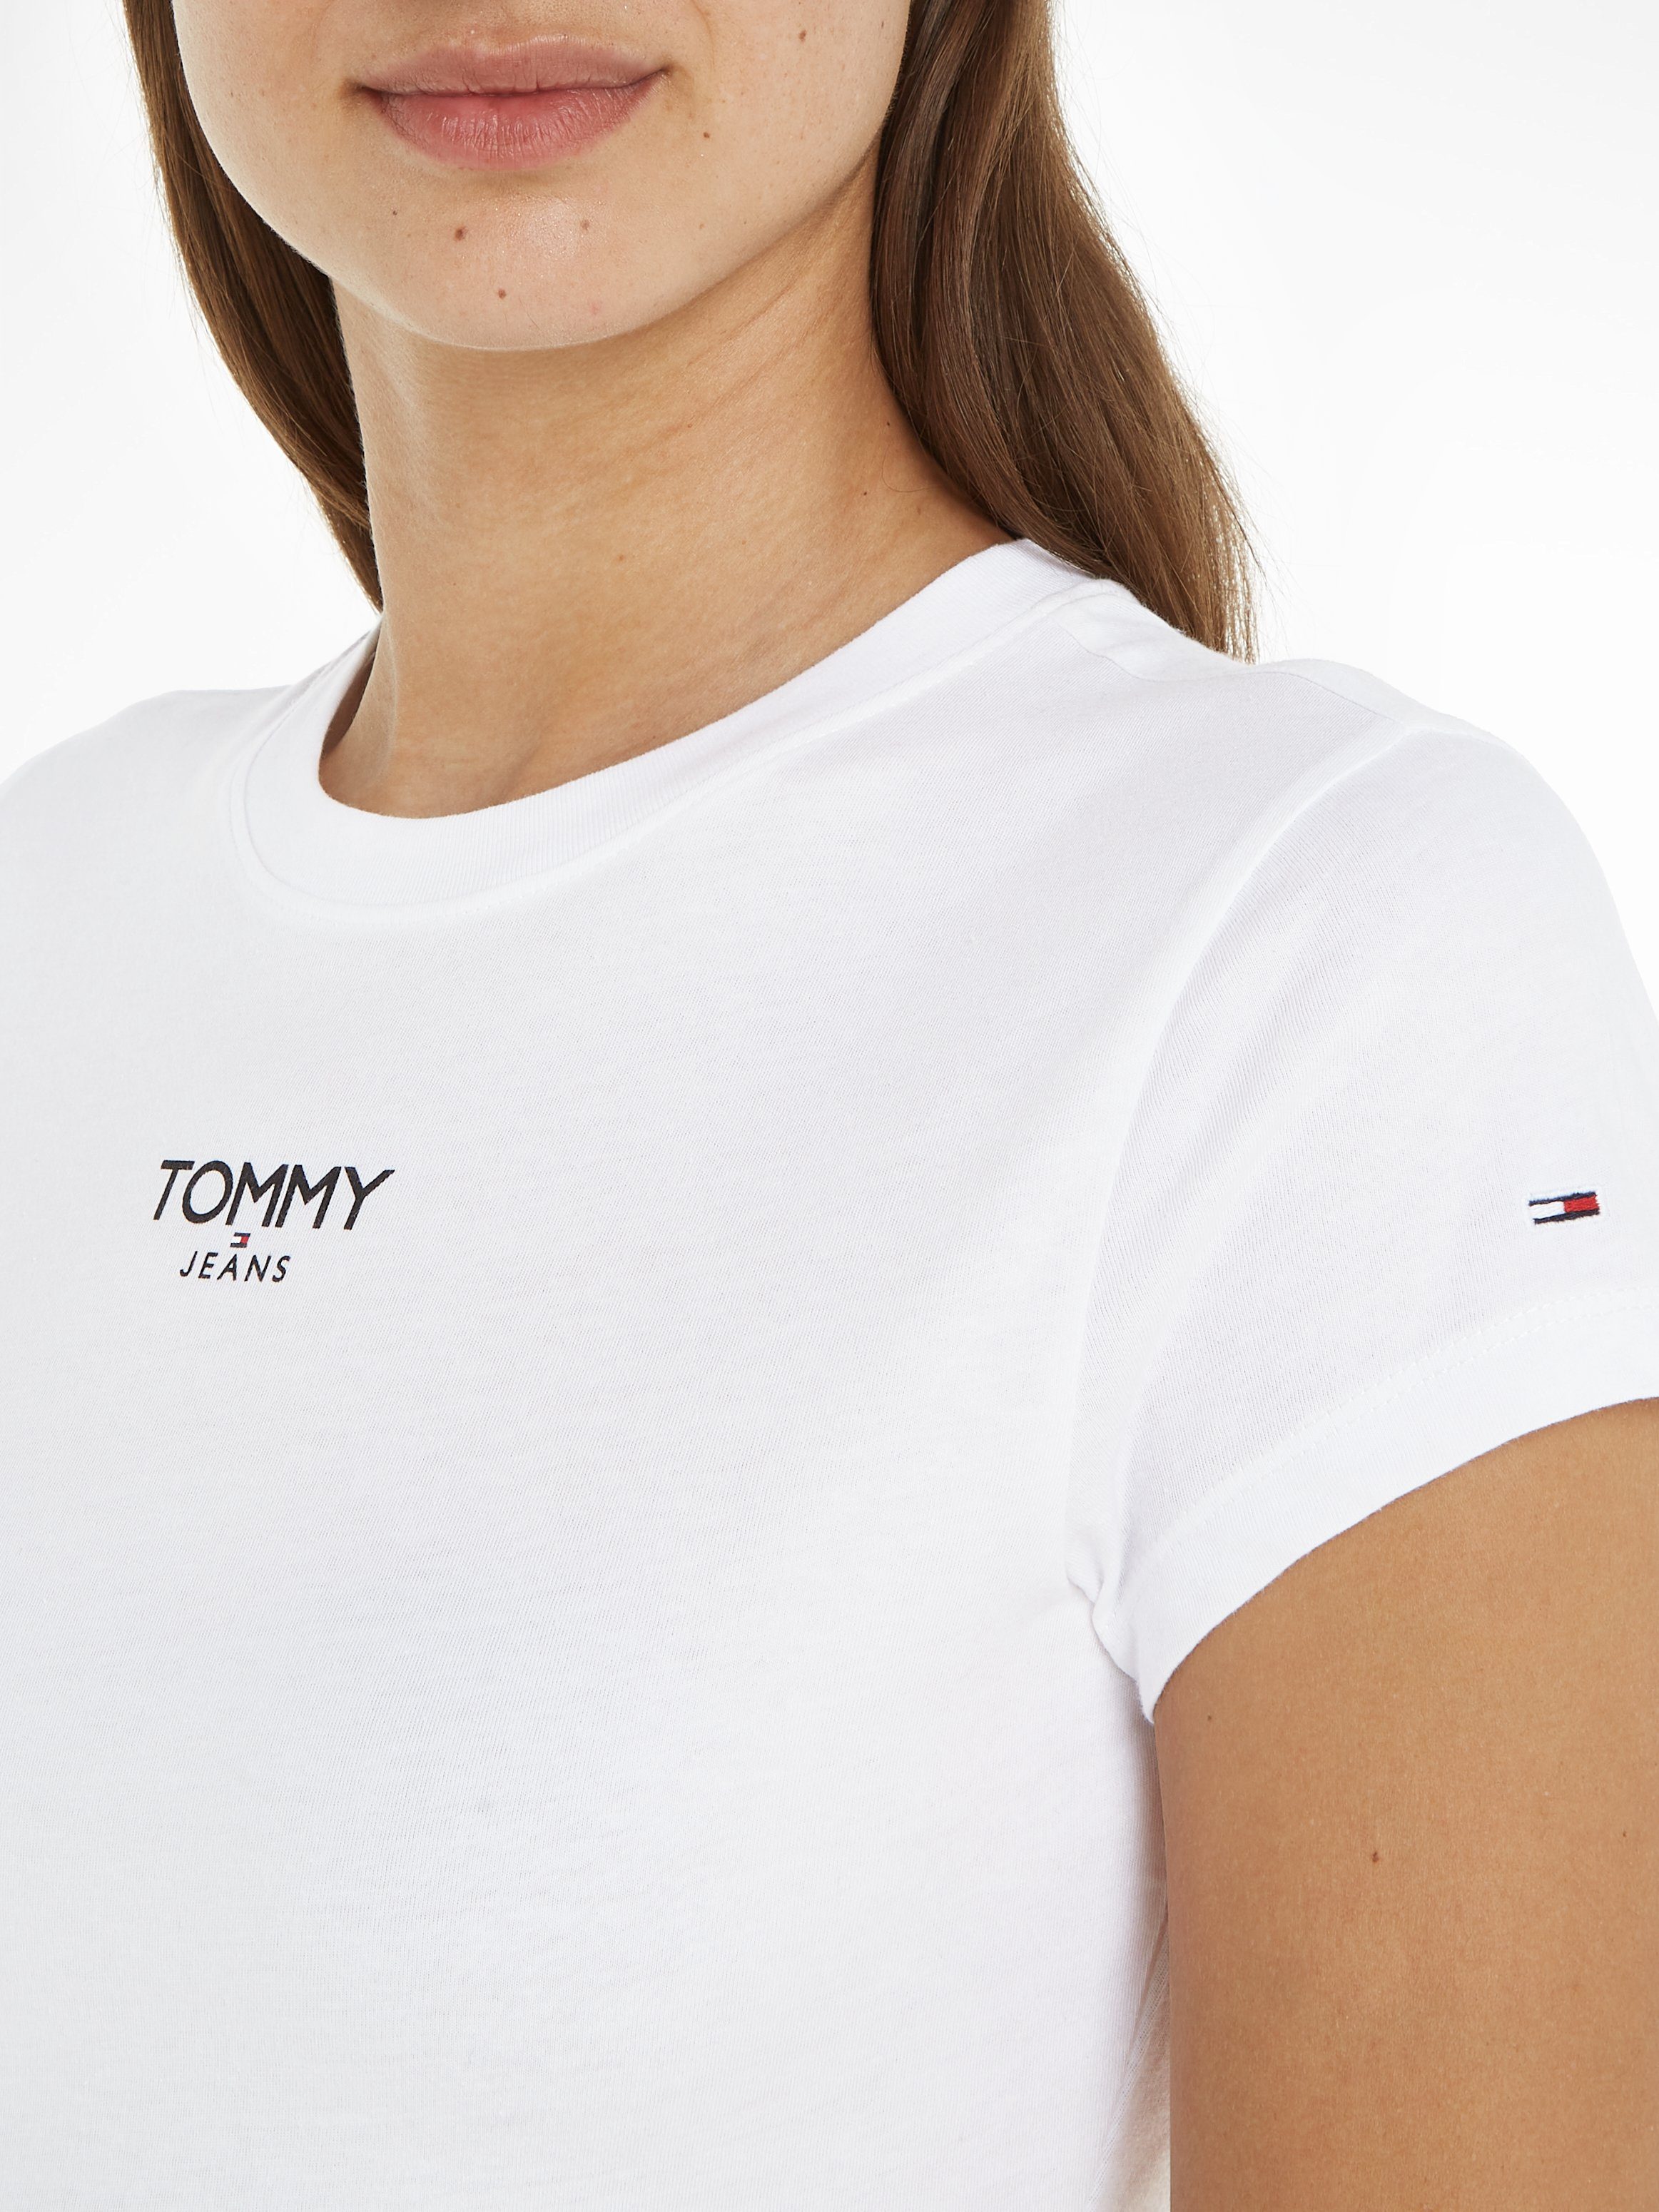 Jeans BBY 1 TJW White Tommy T-Shirt Logo LOGO mit ESSENTIAL SS Tommy Jeans